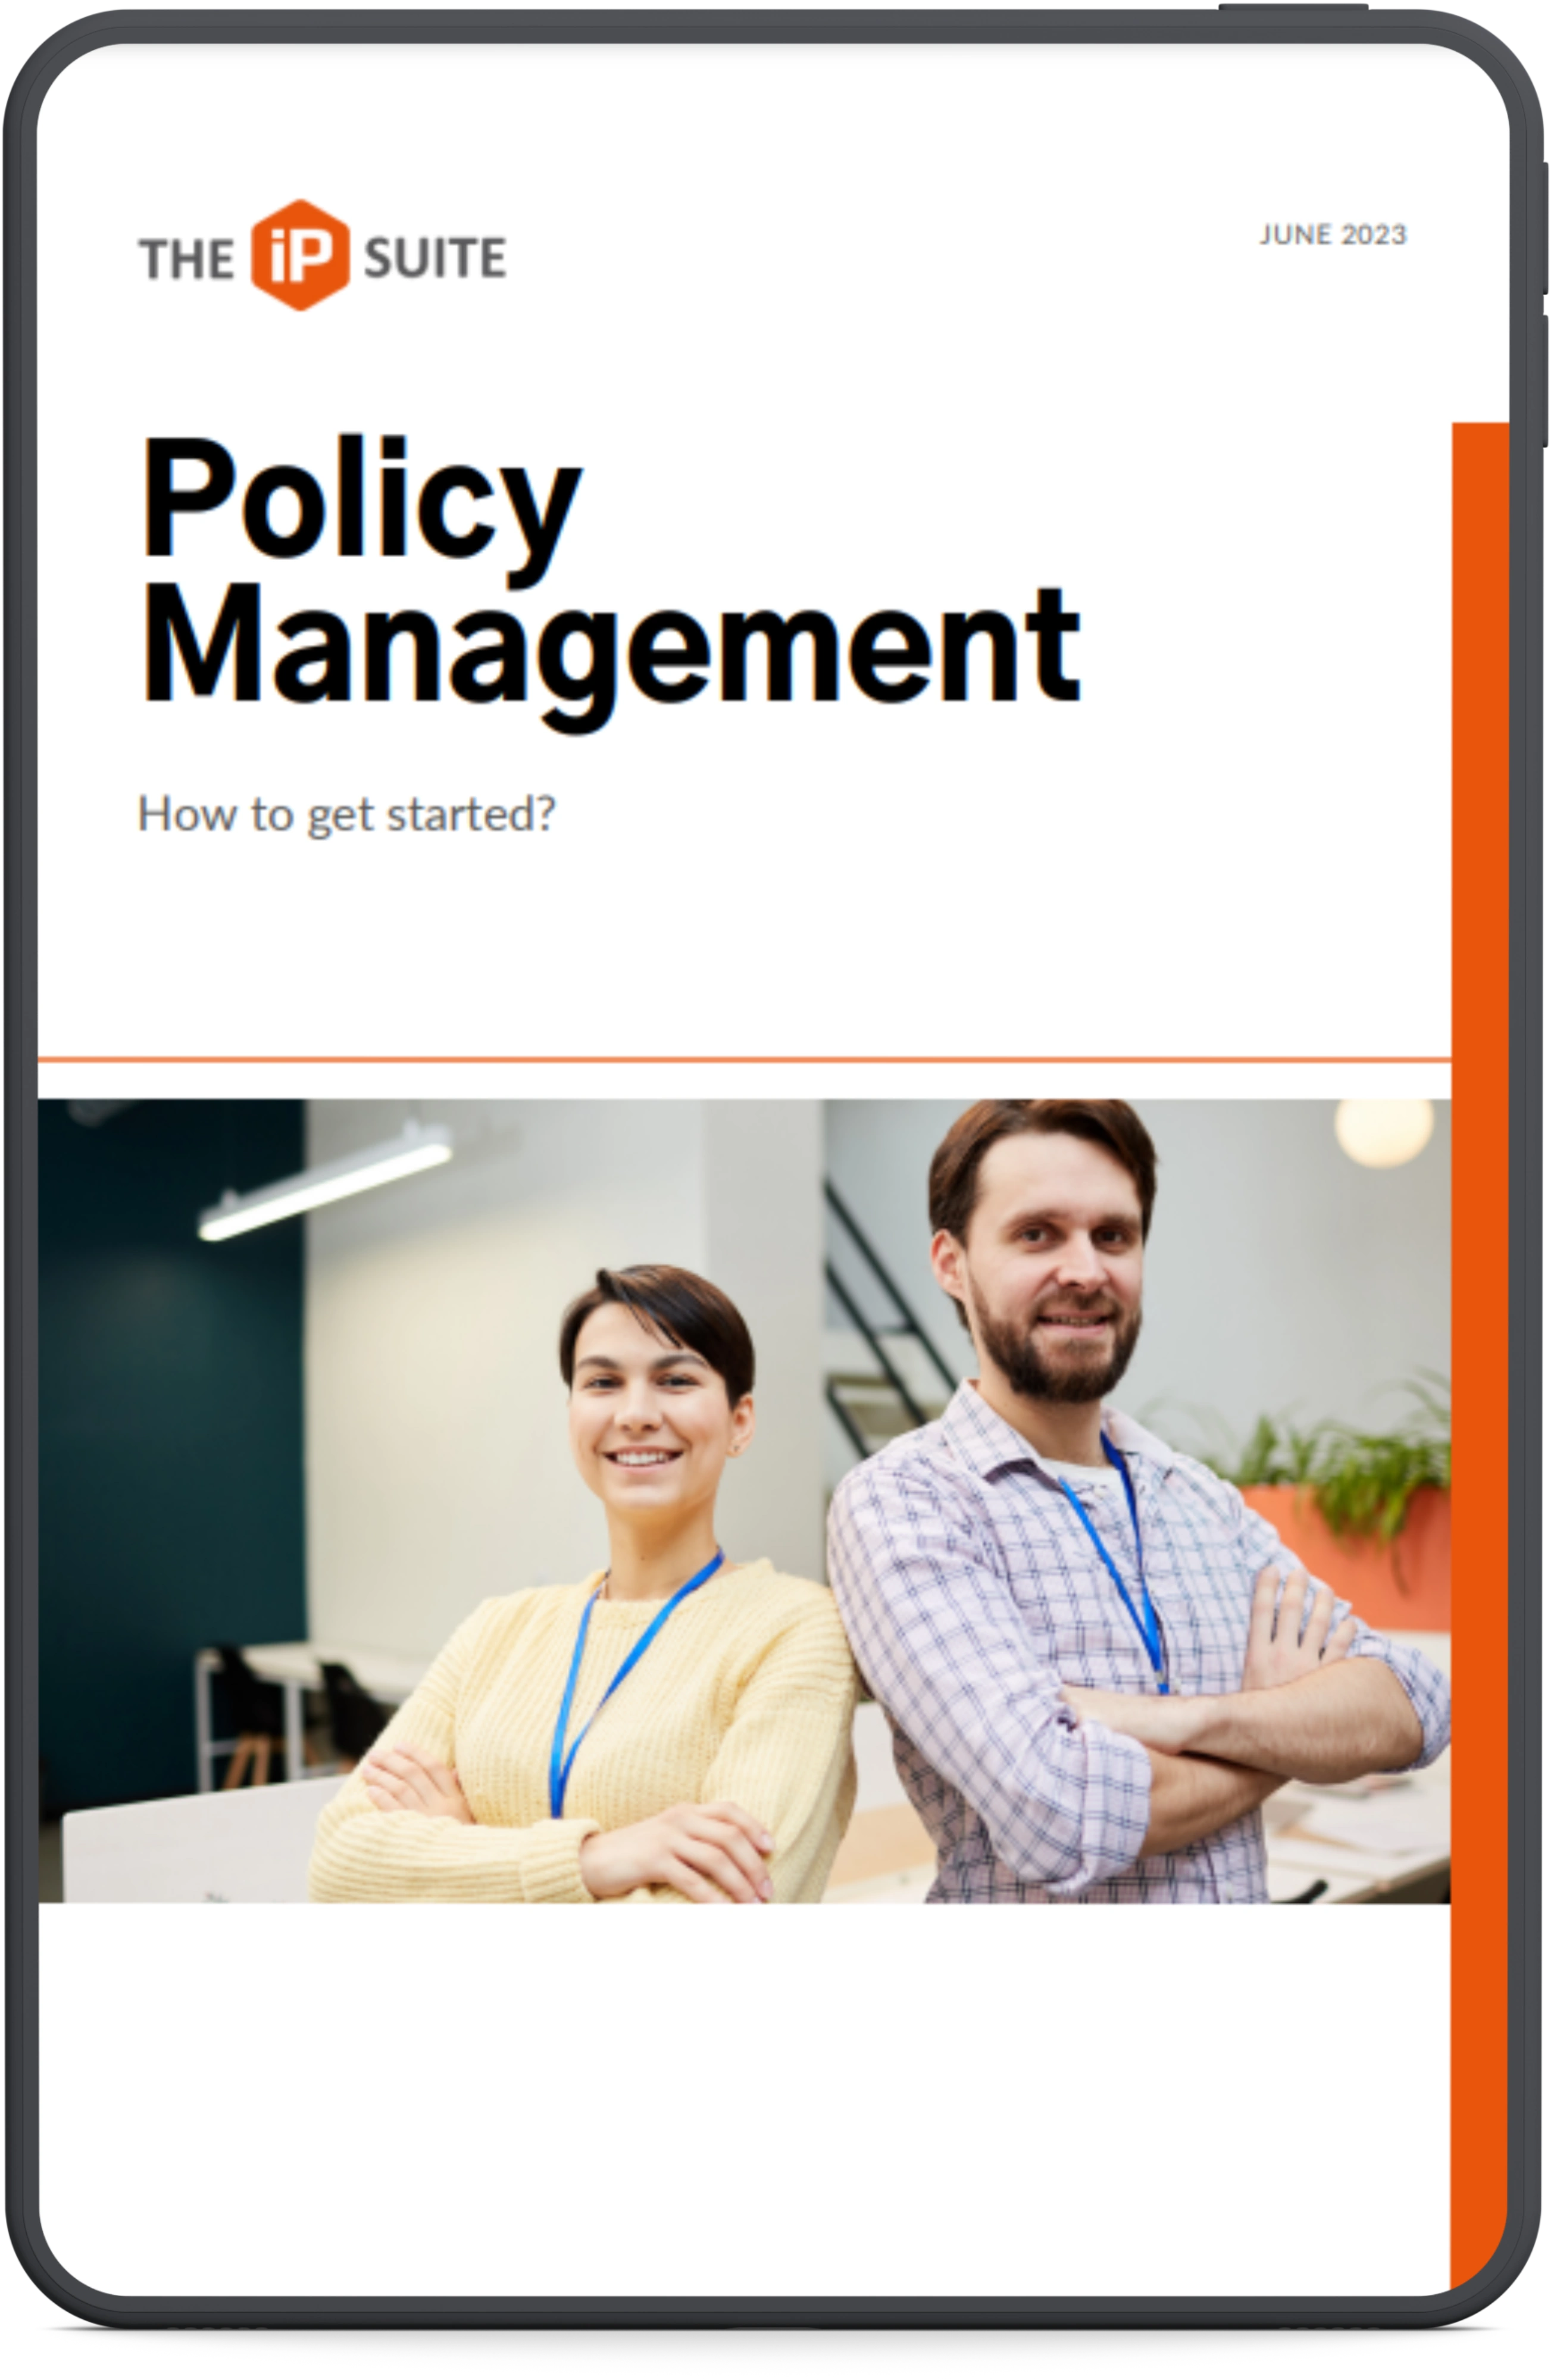 Policy Management - How to get started?